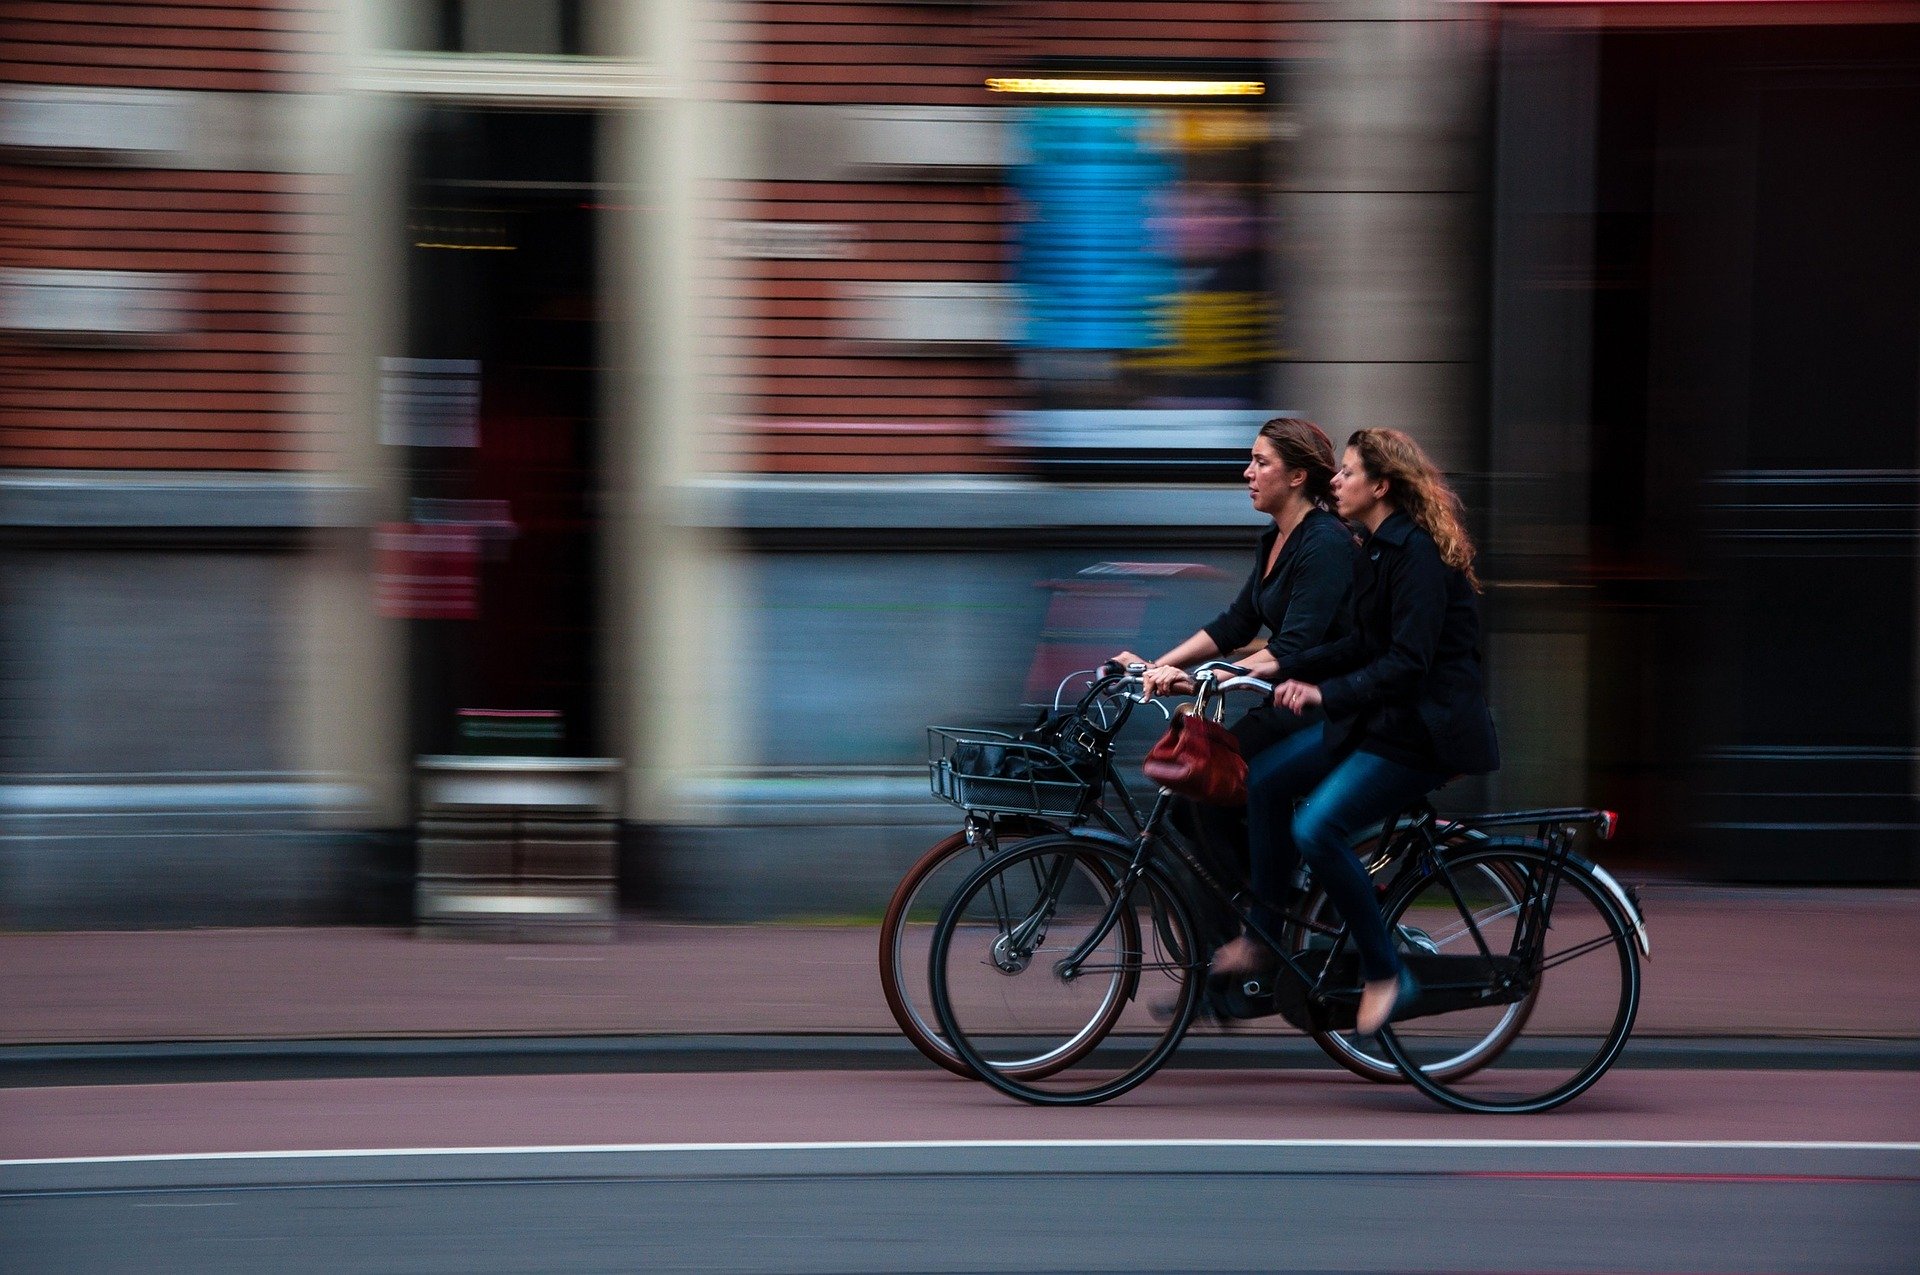 Two cyclists riding side by side in road traffic